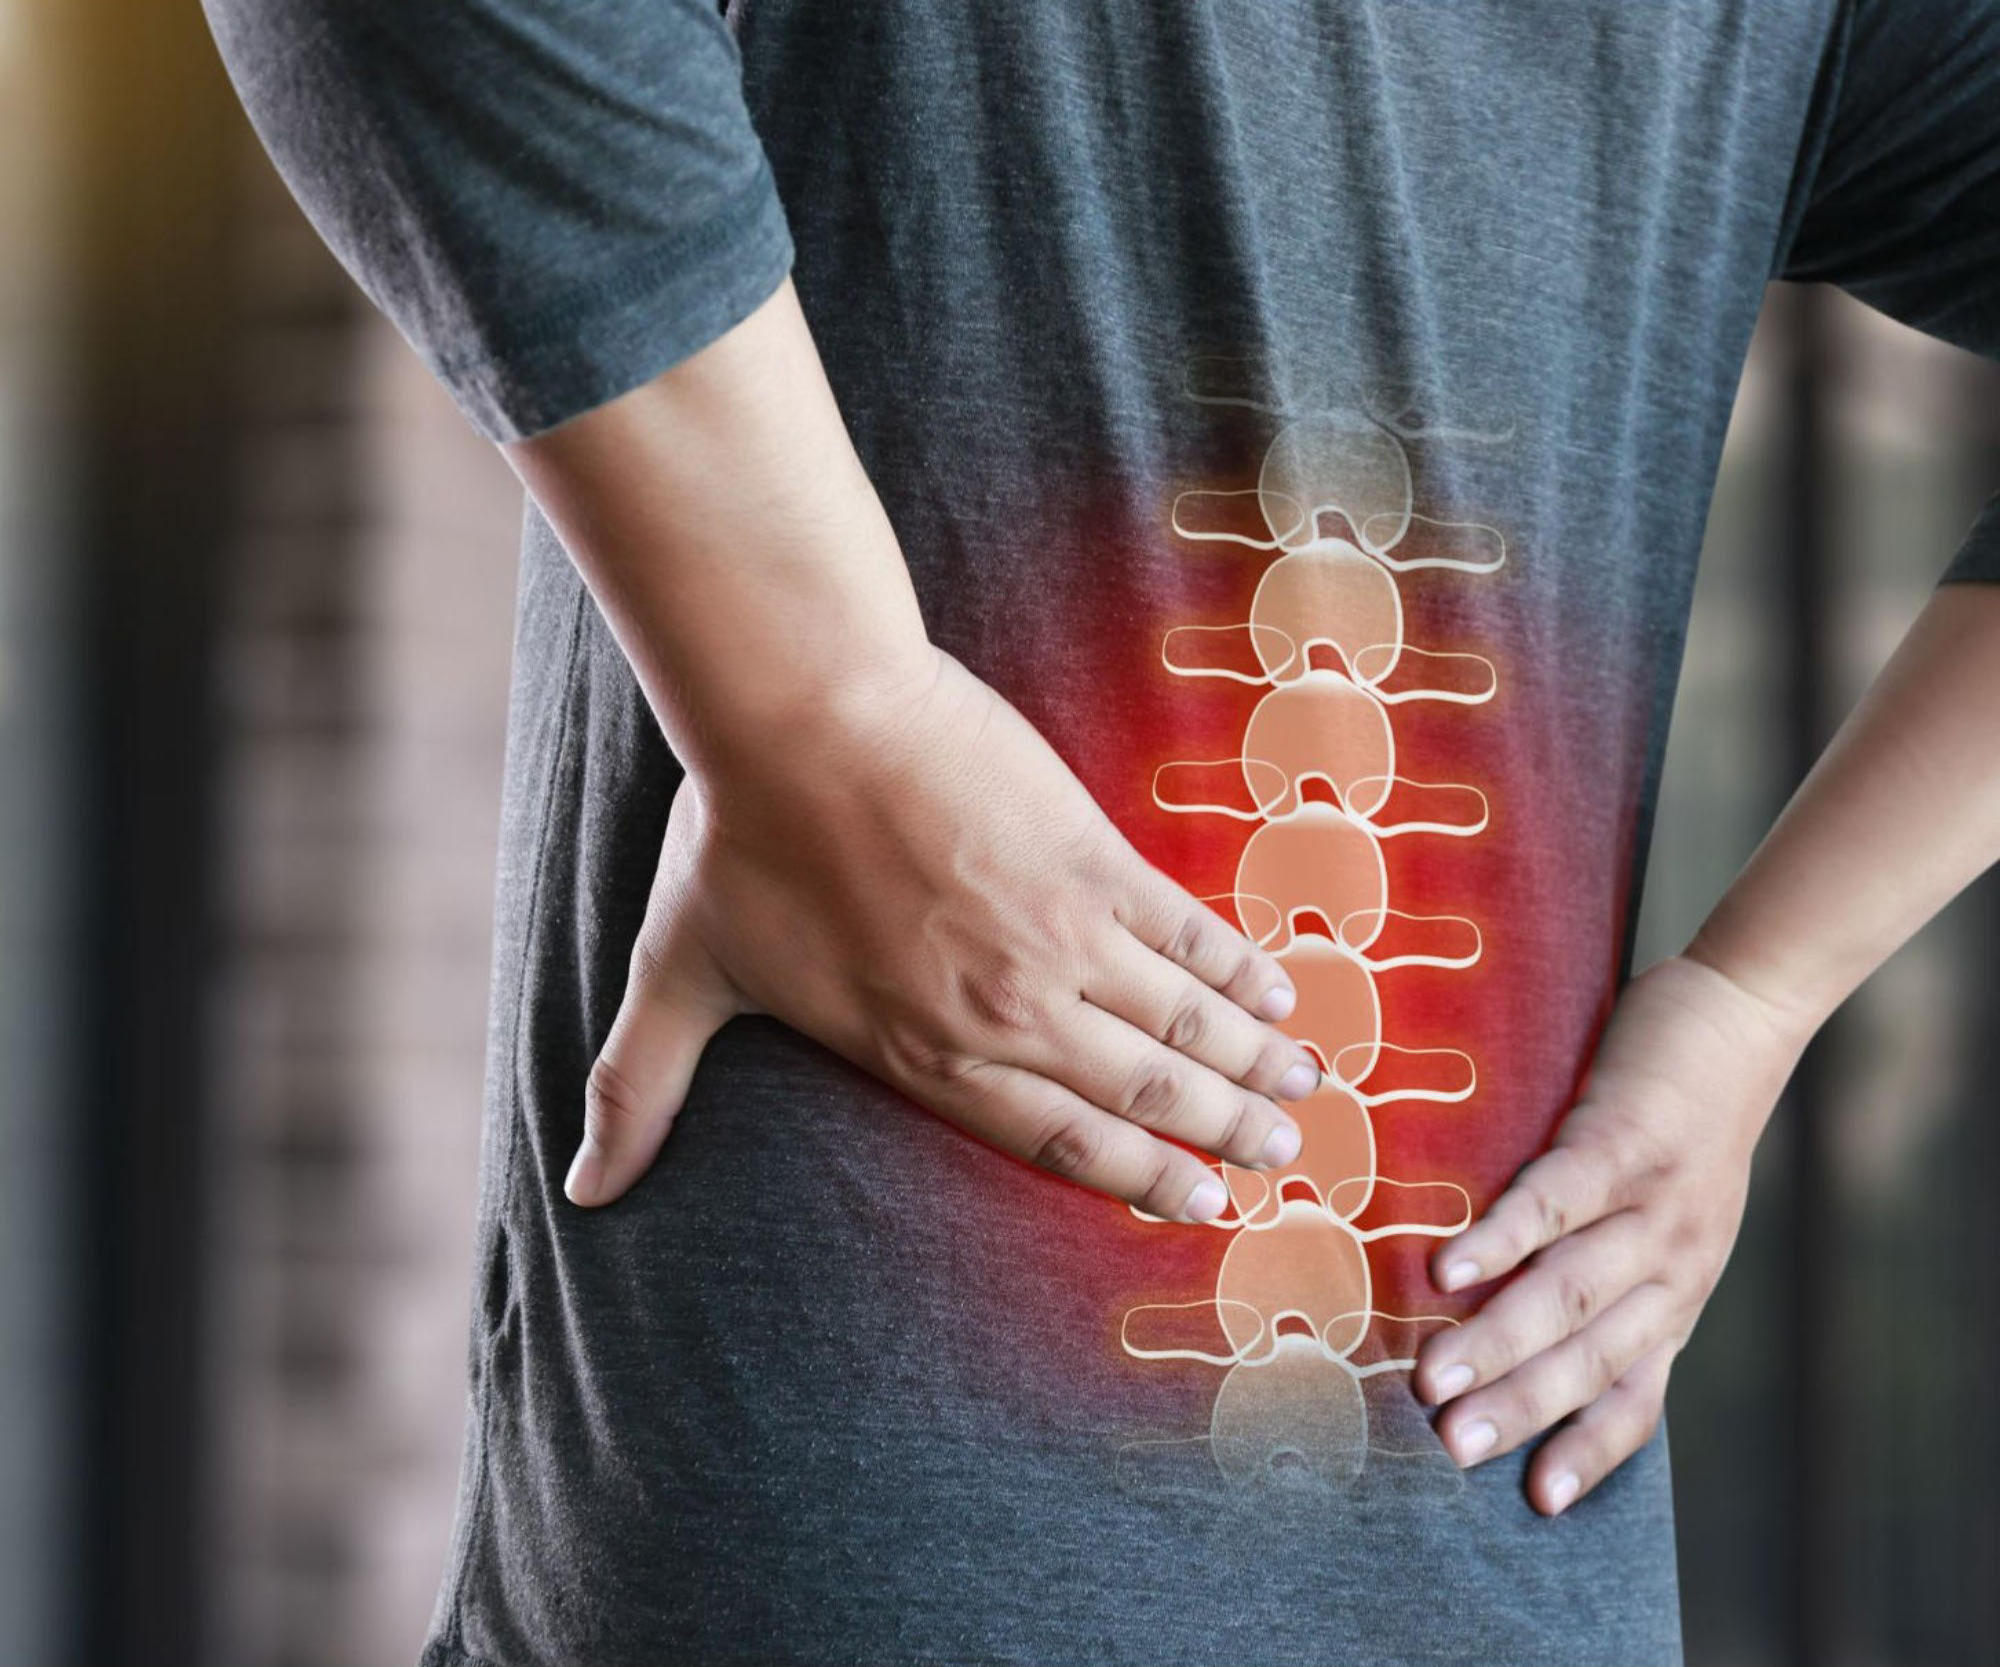 The BMJ: No Evidence Muscle Relaxants Ease Low Back Pain